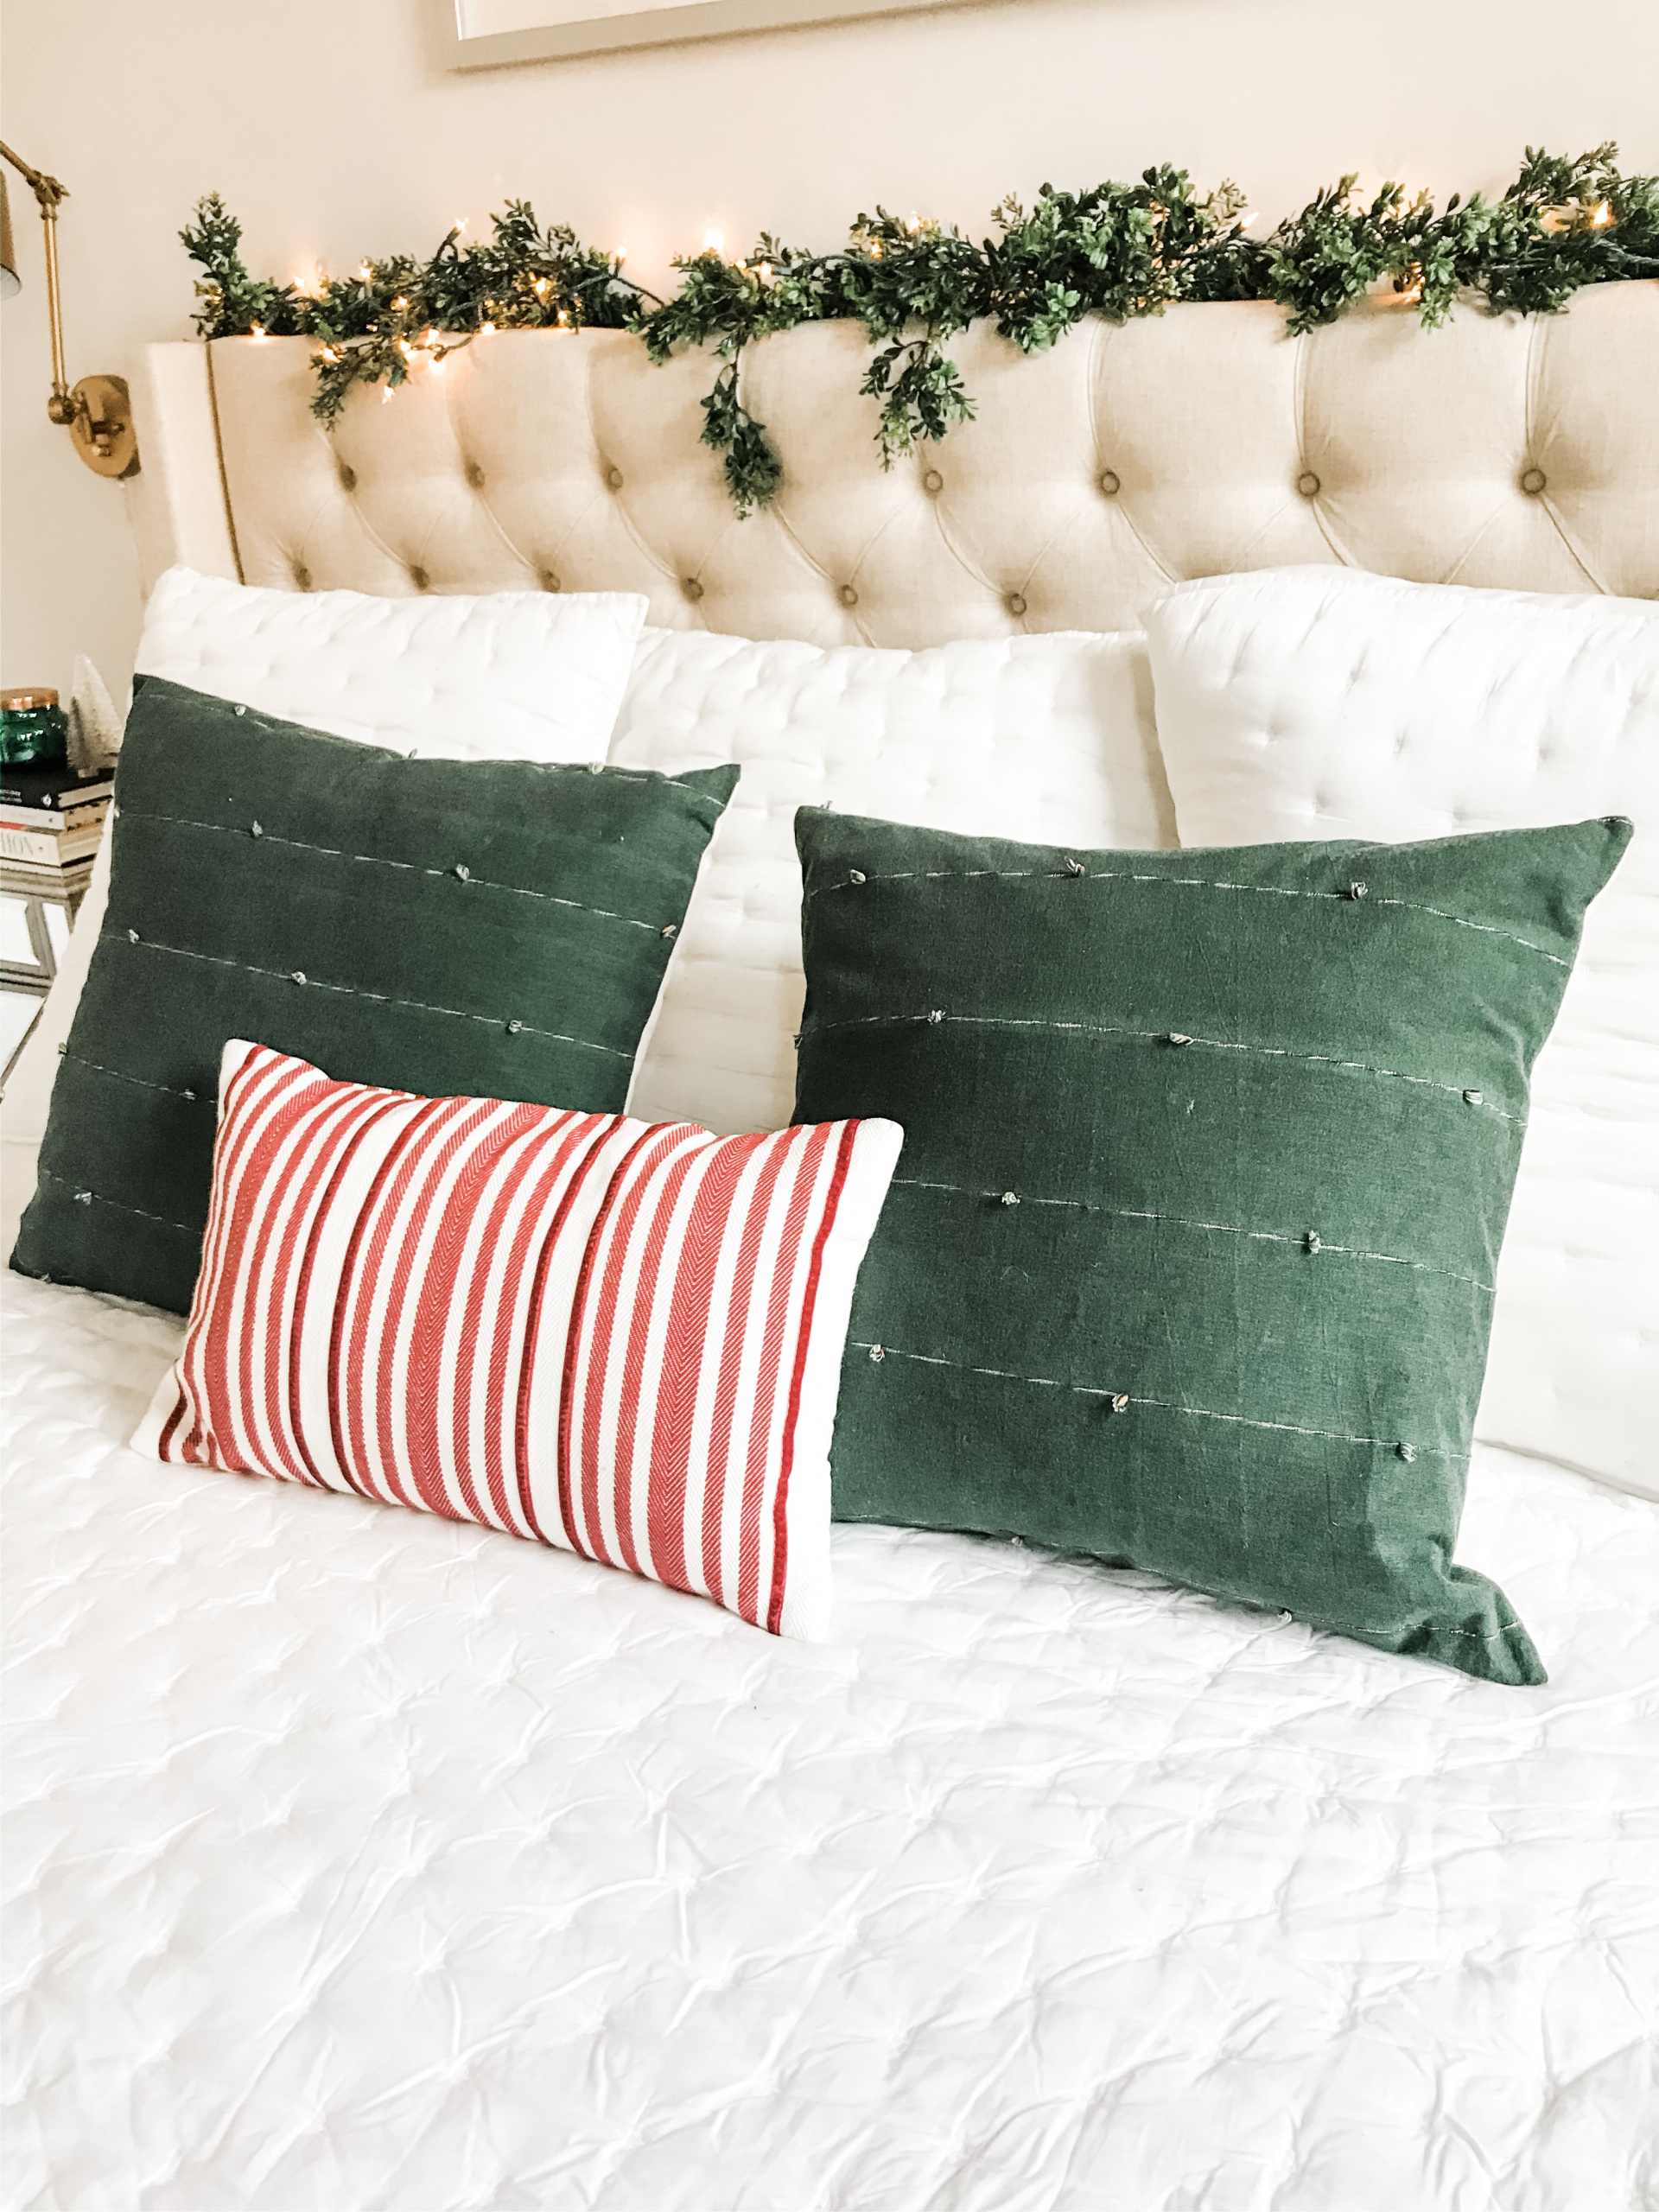 master bedroom christmas decorations. bedroom holiday decor, holiday pillows. etsy pillows